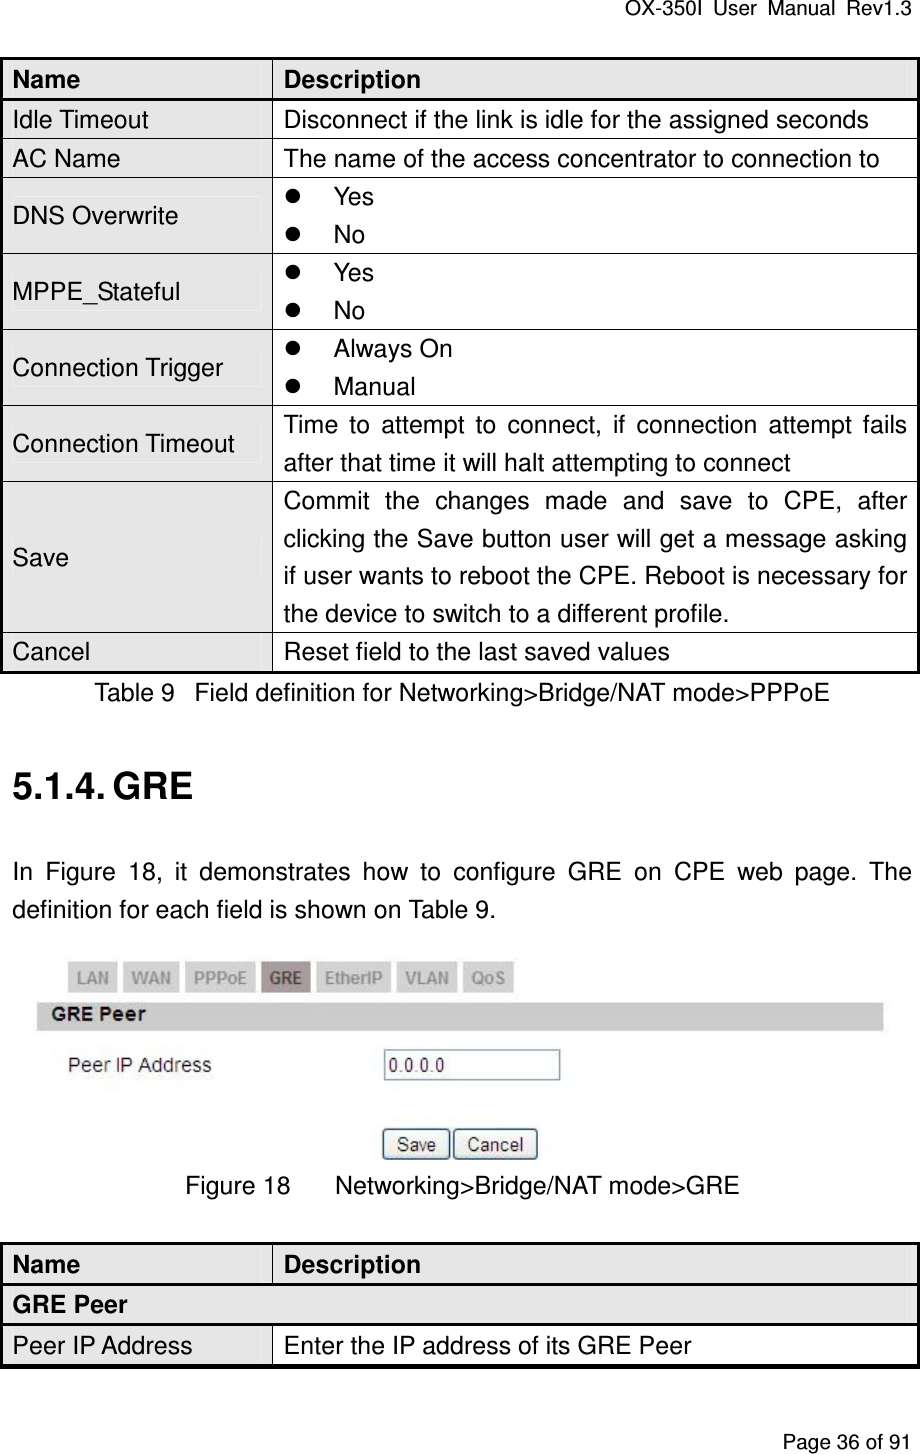 OX-350I  User  Manual  Rev1.3 Page 36 of 91 Name  Description Idle Timeout  Disconnect if the link is idle for the assigned seconds AC Name  The name of the access concentrator to connection to DNS Overwrite   Yes   No MPPE_Stateful   Yes   No Connection Trigger   Always On   Manual Connection Timeout  Time  to  attempt  to  connect,  if  connection  attempt  fails after that time it will halt attempting to connect Save Commit  the  changes  made  and  save  to  CPE,  after clicking the Save button user will get a message asking if user wants to reboot the CPE. Reboot is necessary for the device to switch to a different profile. Cancel  Reset field to the last saved values Table 9  Field definition for Networking&gt;Bridge/NAT mode&gt;PPPoE 5.1.4. GRE In  Figure  18,  it  demonstrates  how  to  configure  GRE  on  CPE  web  page.  The definition for each field is shown on Table 9.  Figure 18  Networking&gt;Bridge/NAT mode&gt;GRE Name  Description GRE Peer Peer IP Address  Enter the IP address of its GRE Peer 